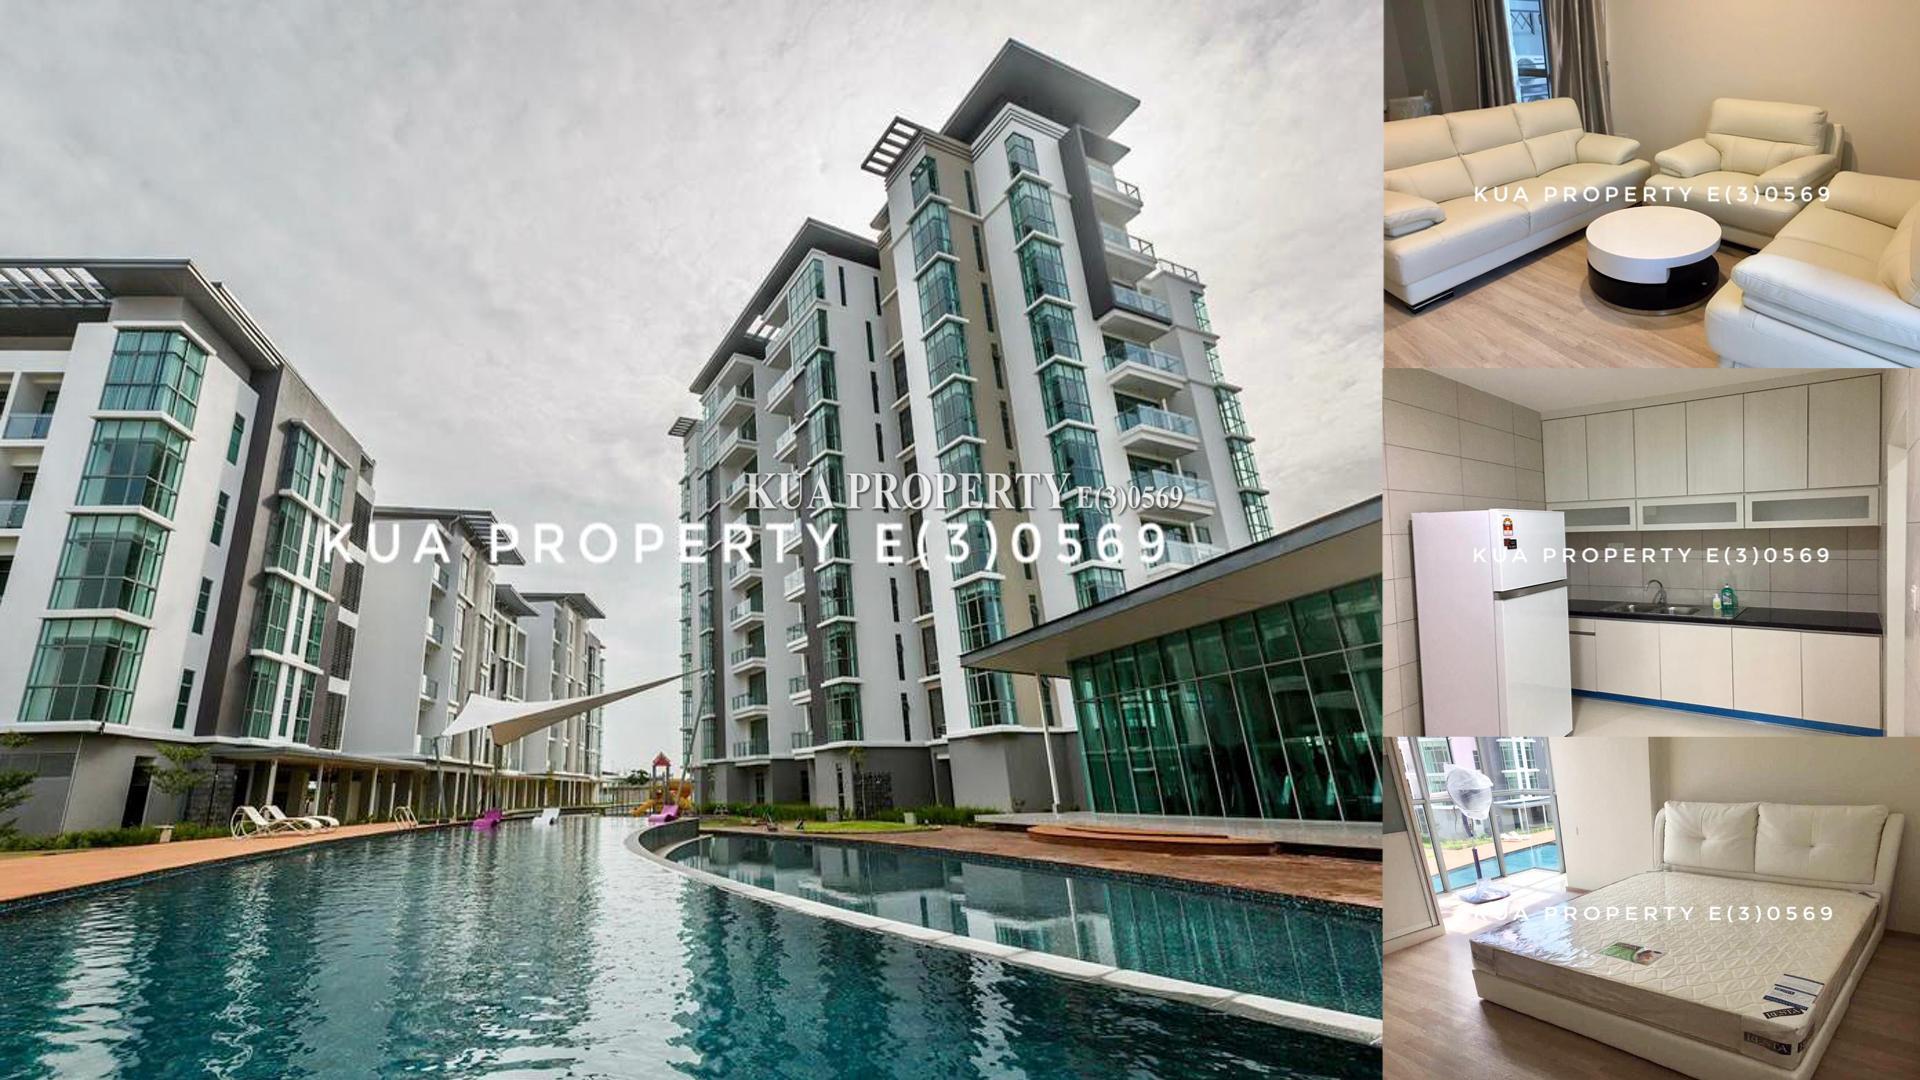 Level 3 The Park Residence Condominium for Sale!! Located at Tabuan Tranquility, Kuching